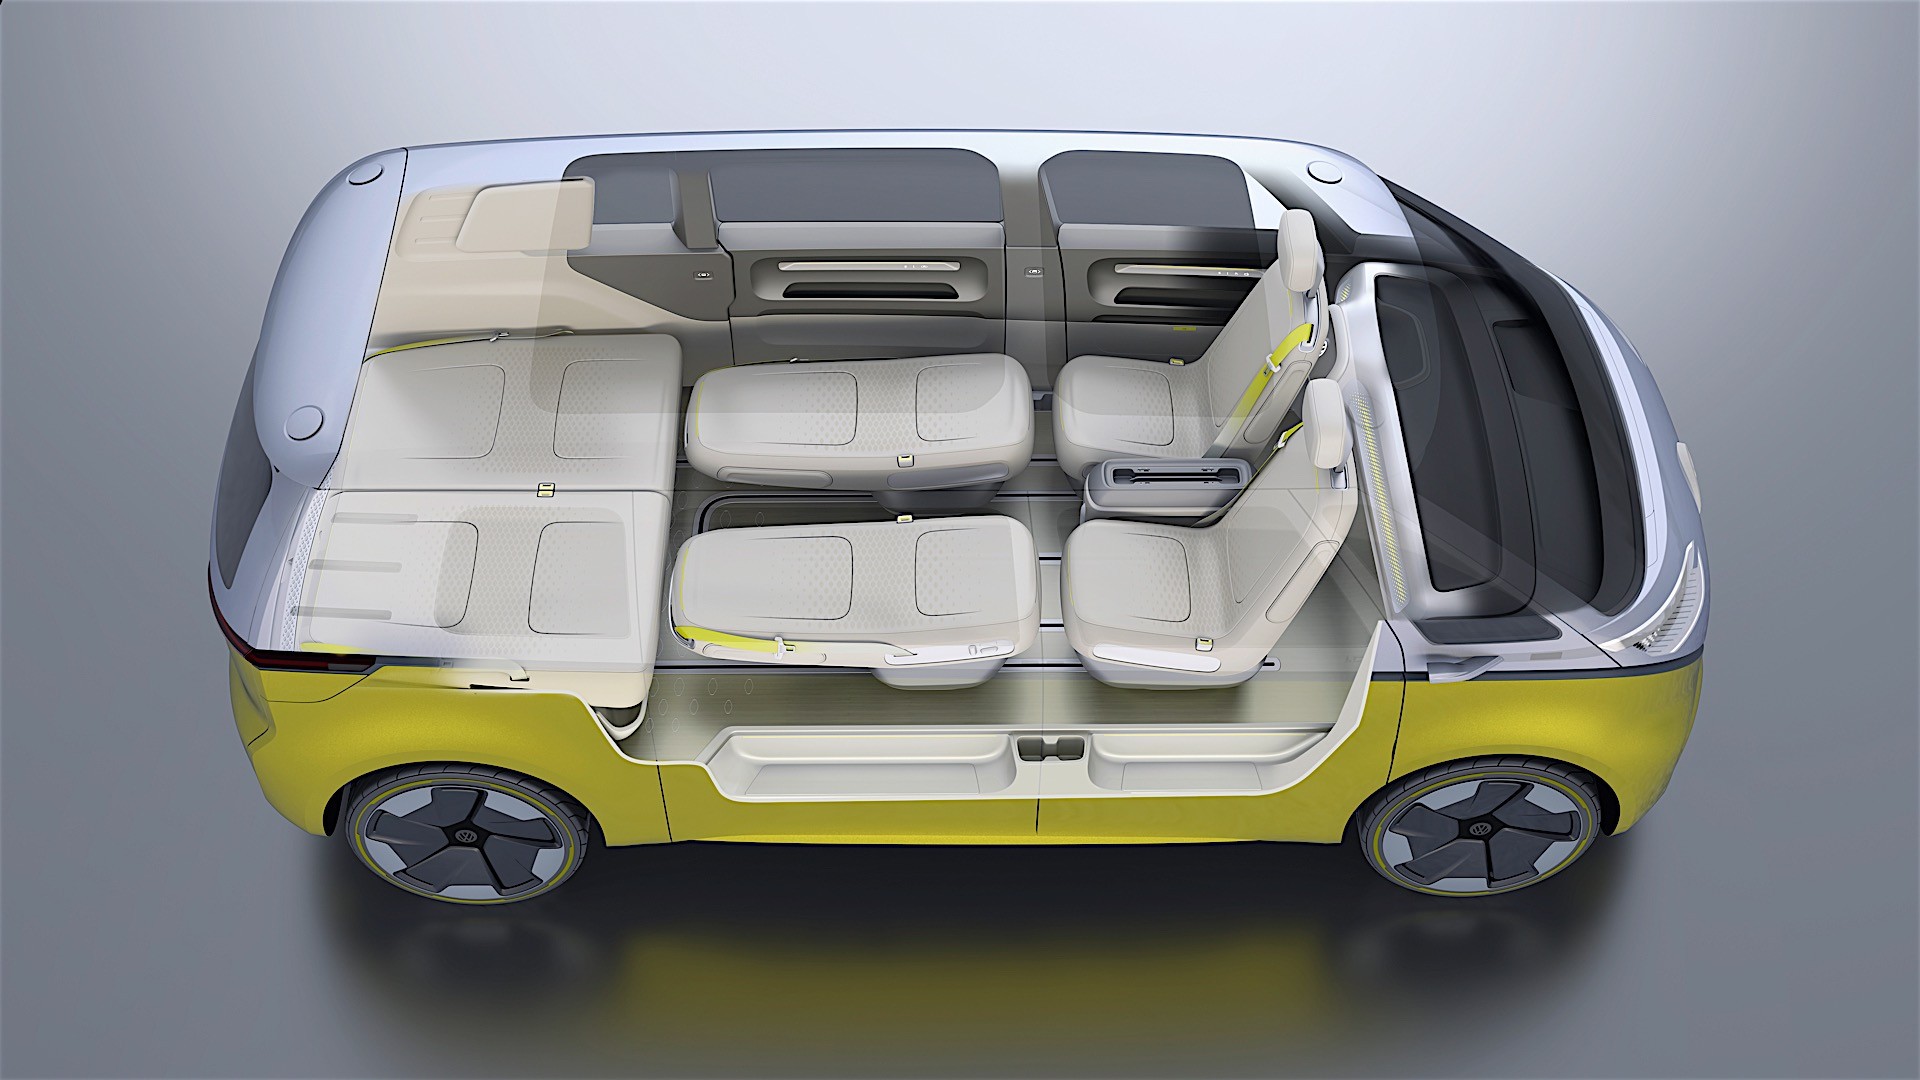 Vw Id Buzz May Present Third Row Of Seats As New Pictures Show